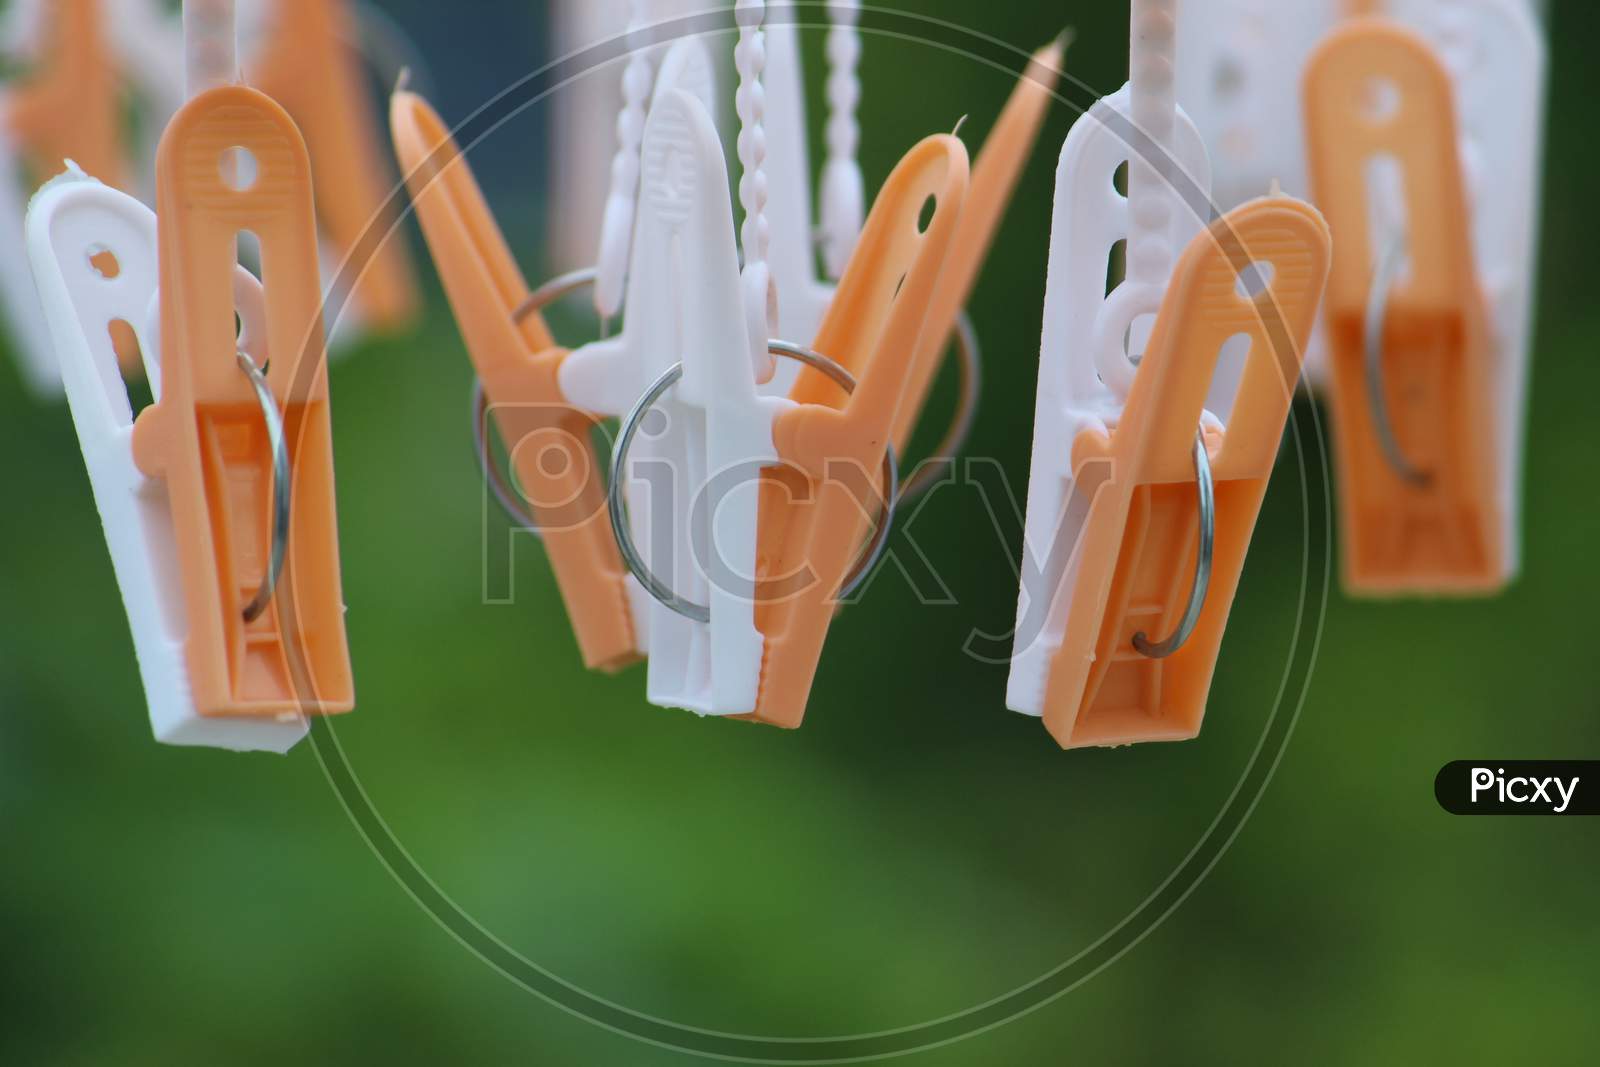 Group of colorful cloth clips used for hanging cloths display.